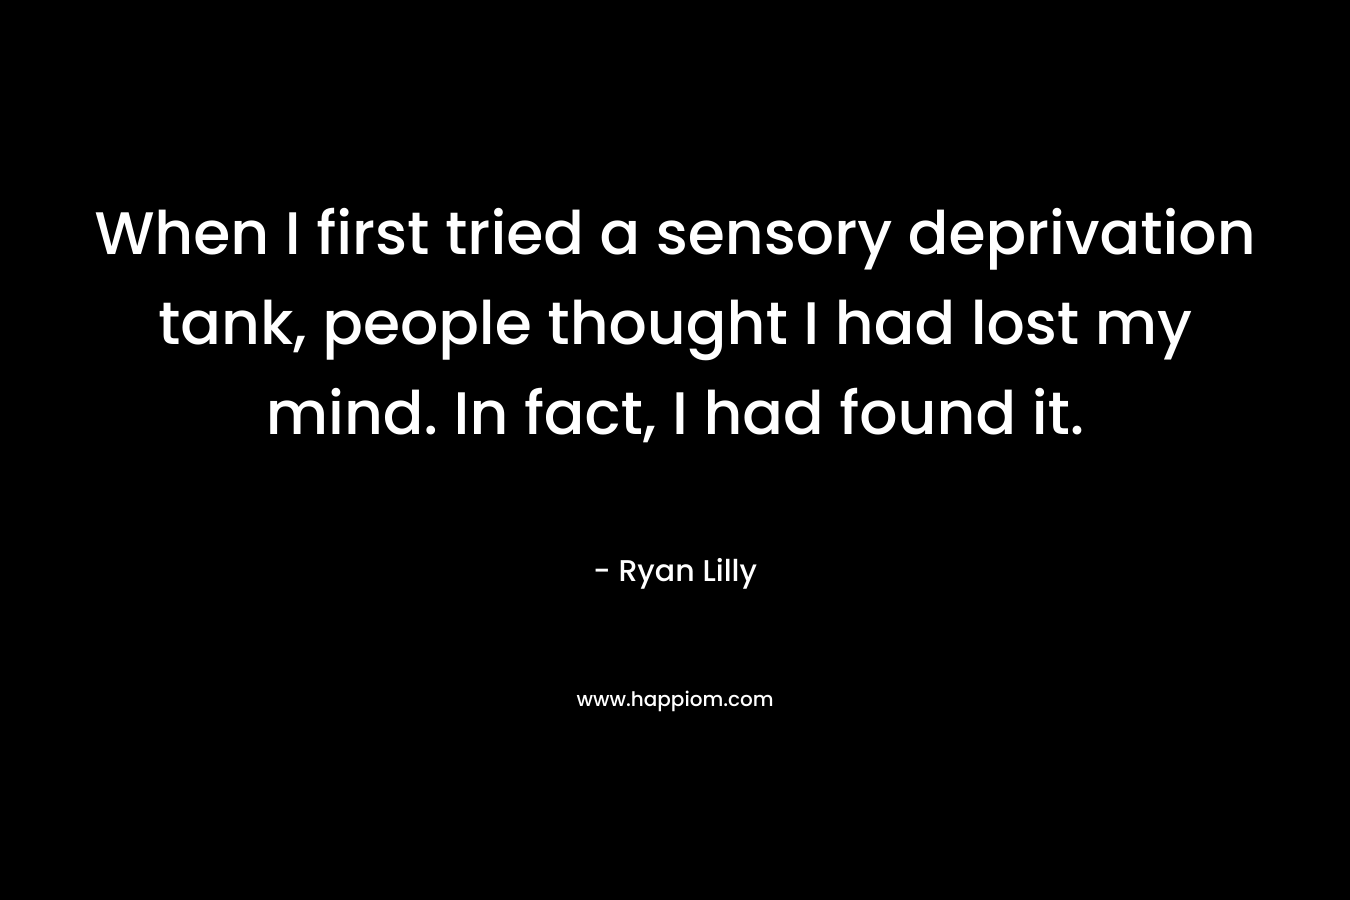 When I first tried a sensory deprivation tank, people thought I had lost my mind. In fact, I had found it. – Ryan Lilly